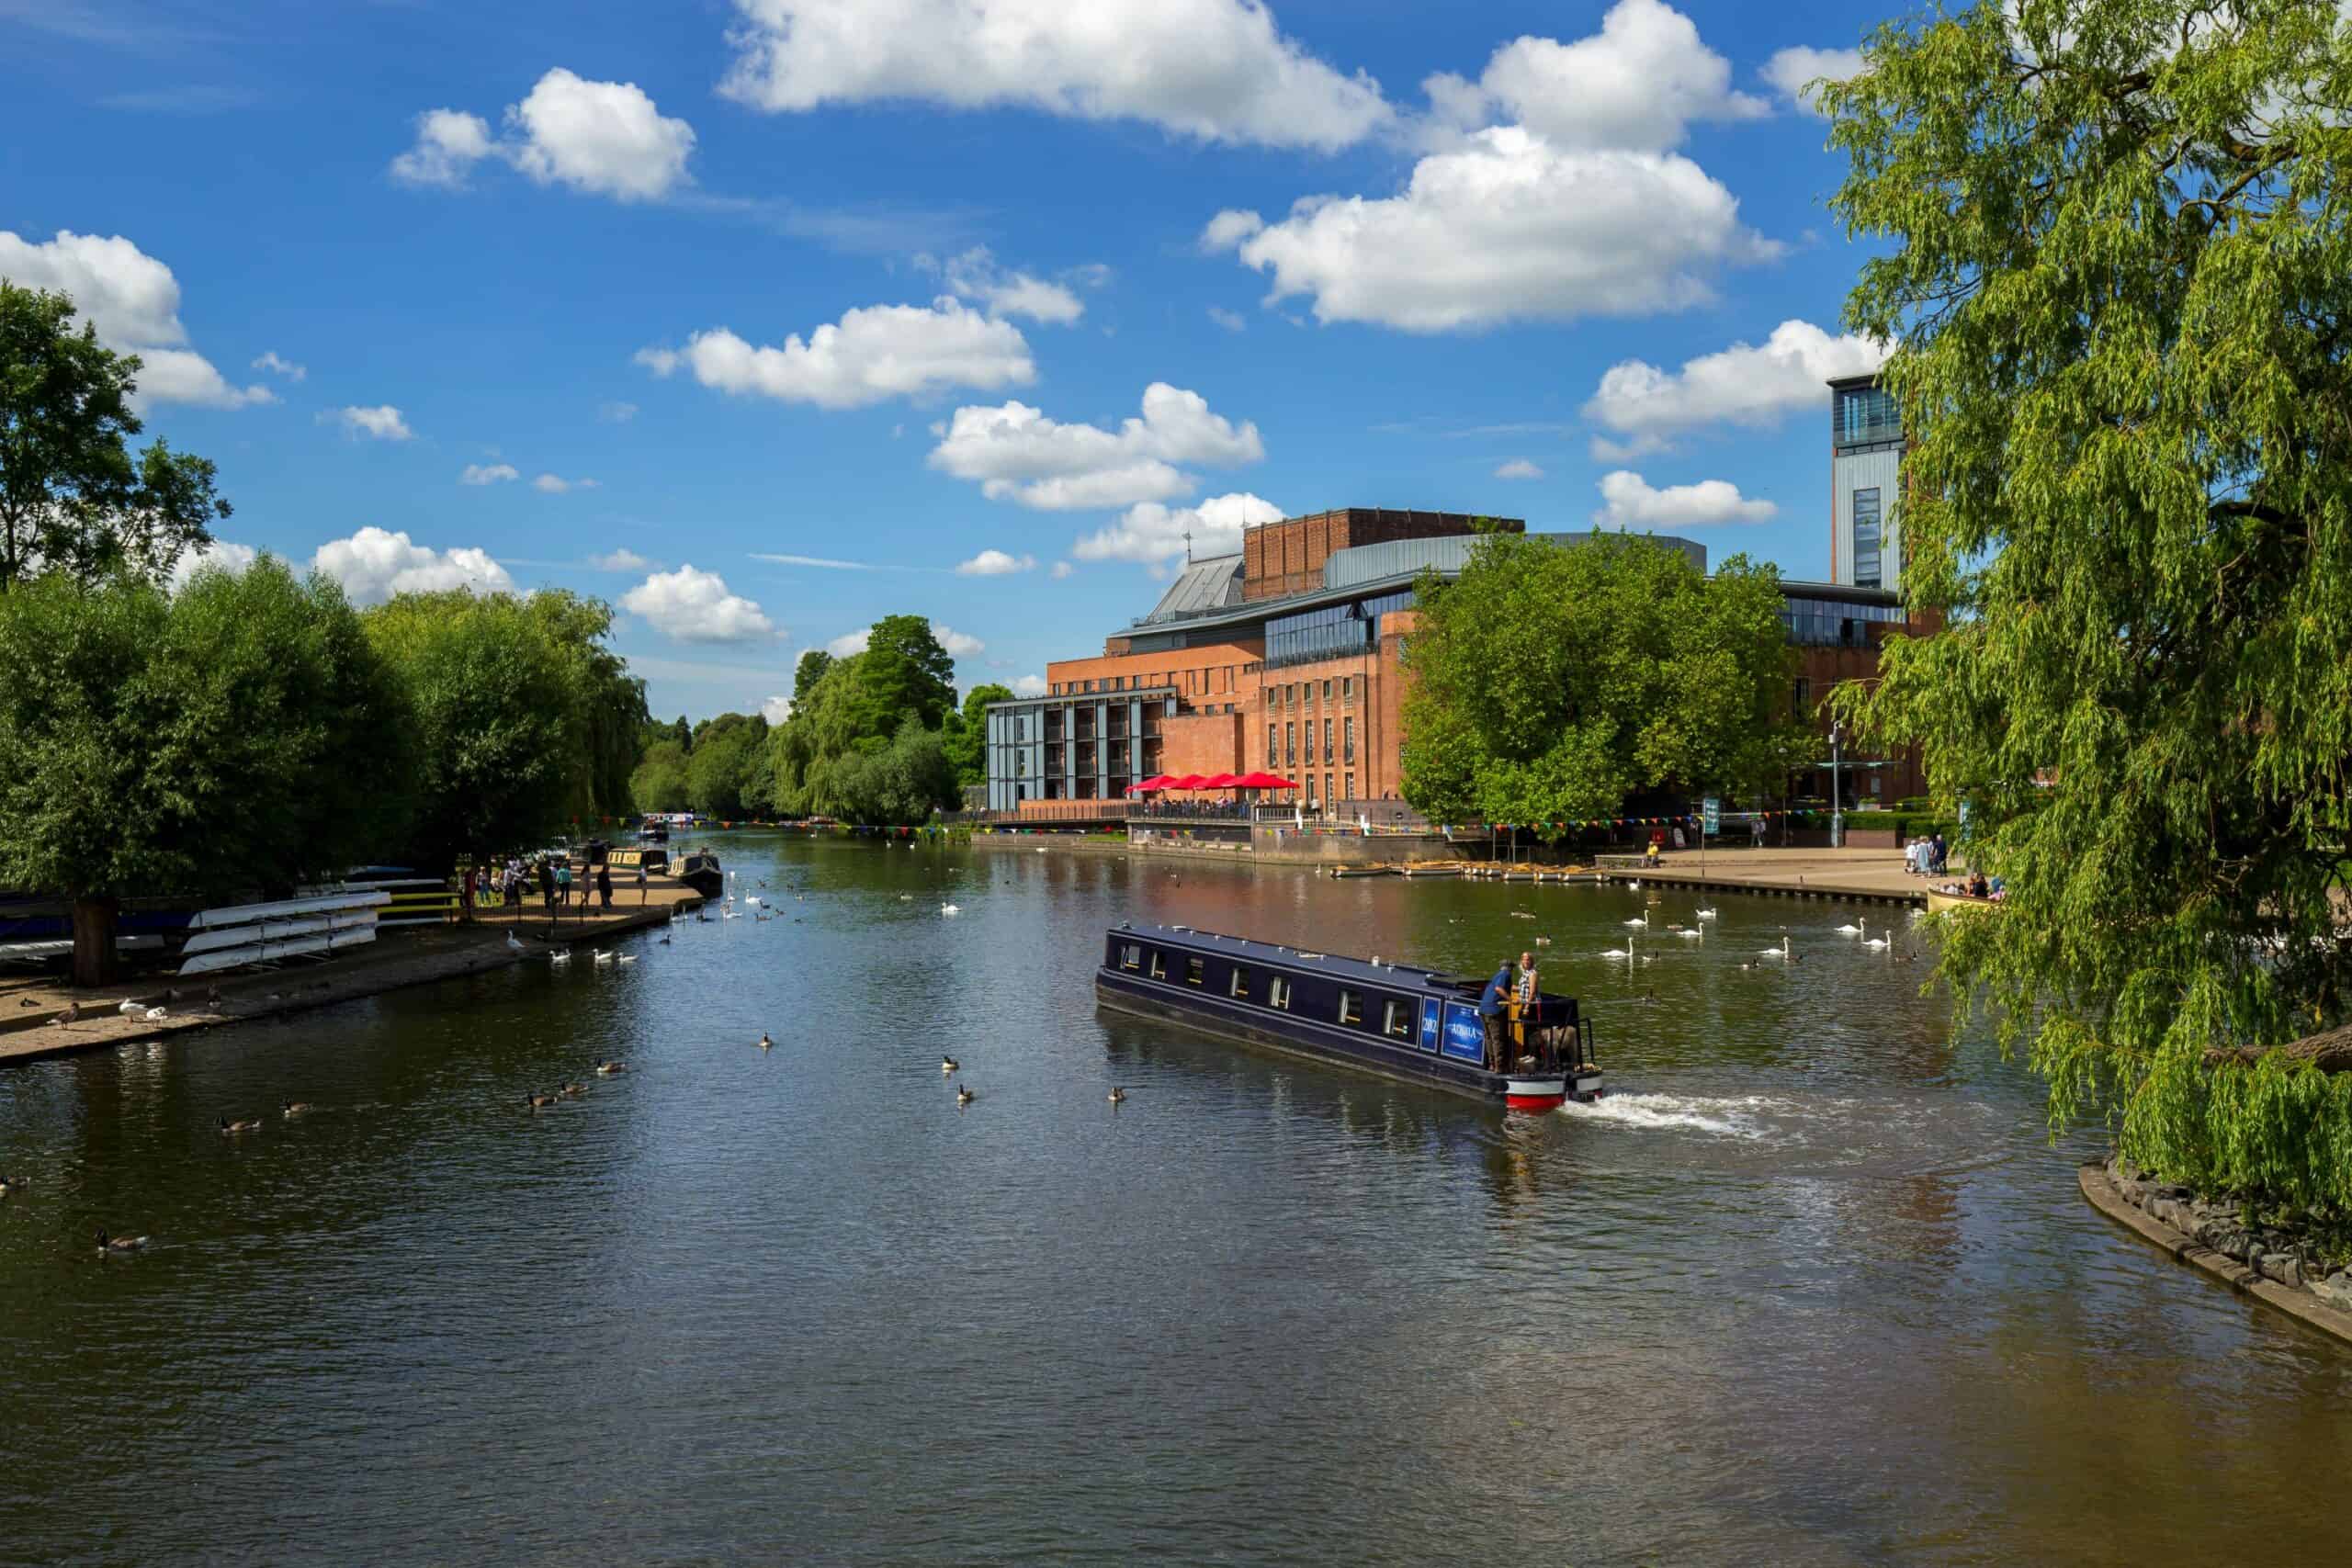 Visit Stratford upon Avon by canal boat